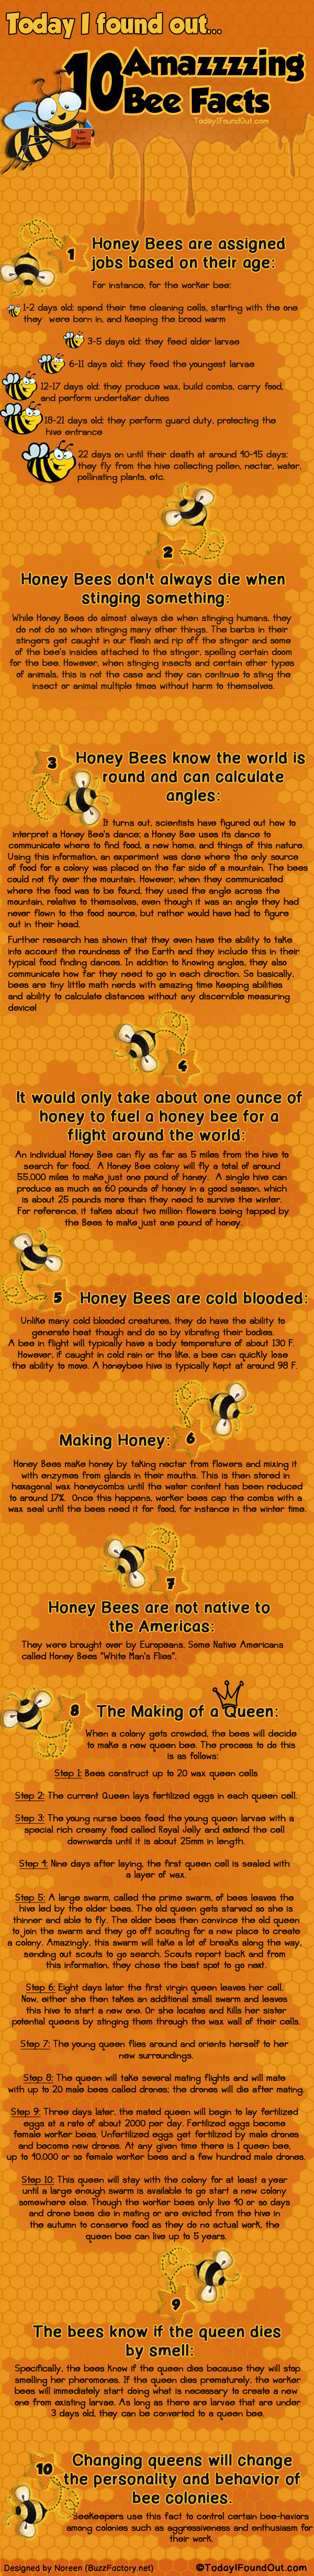 10 Amazzzzing Bee Facts Infographic